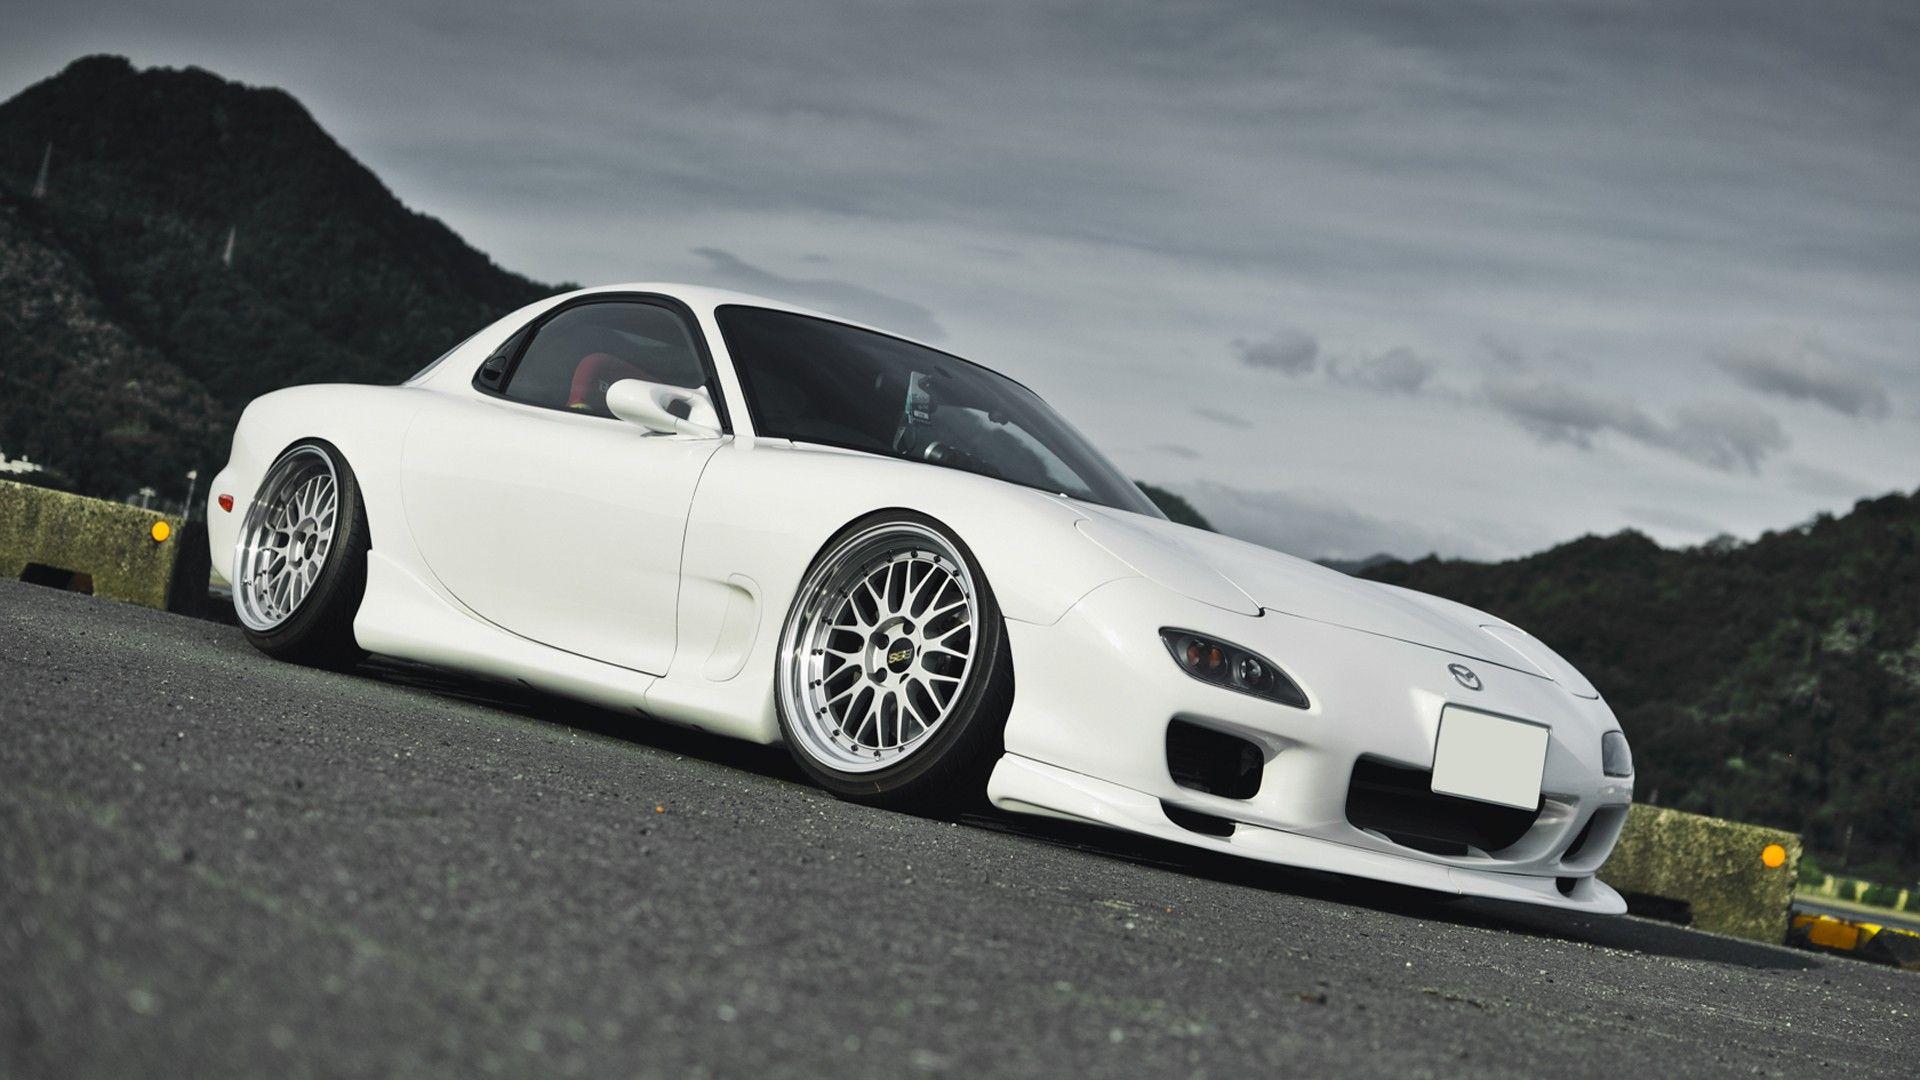 RX7 Awesome High Quality Wallpaper Uncategorized